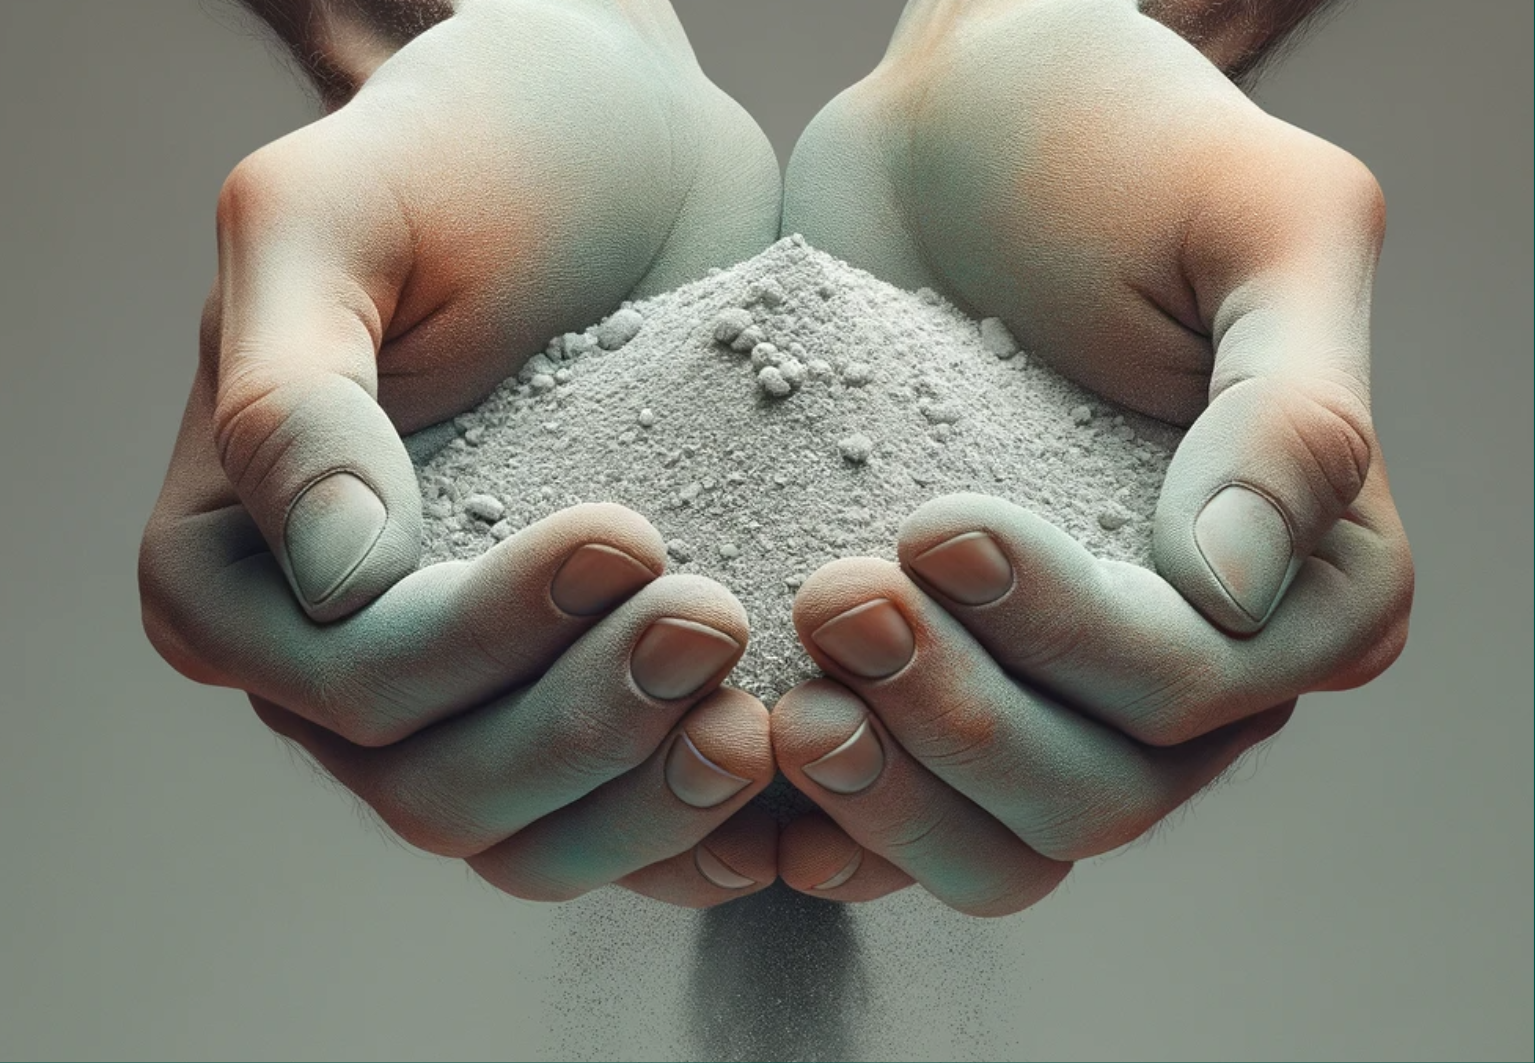 Realistic image of hands holding silica dust, showcasing industrial safety and silicosis prevention in the workplace